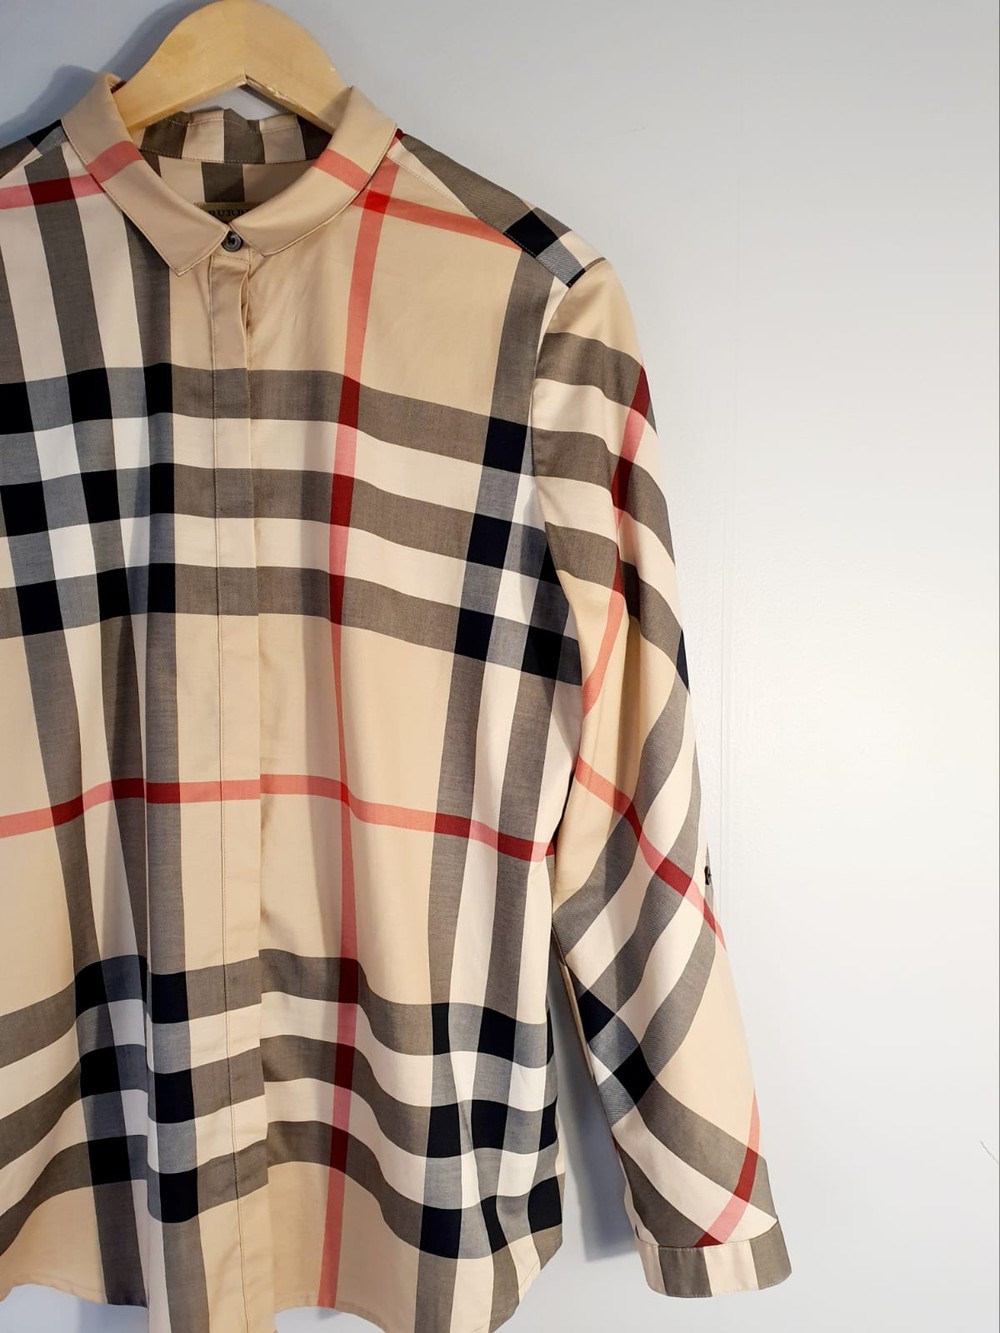 Camisa Burberry - 2nd Chance